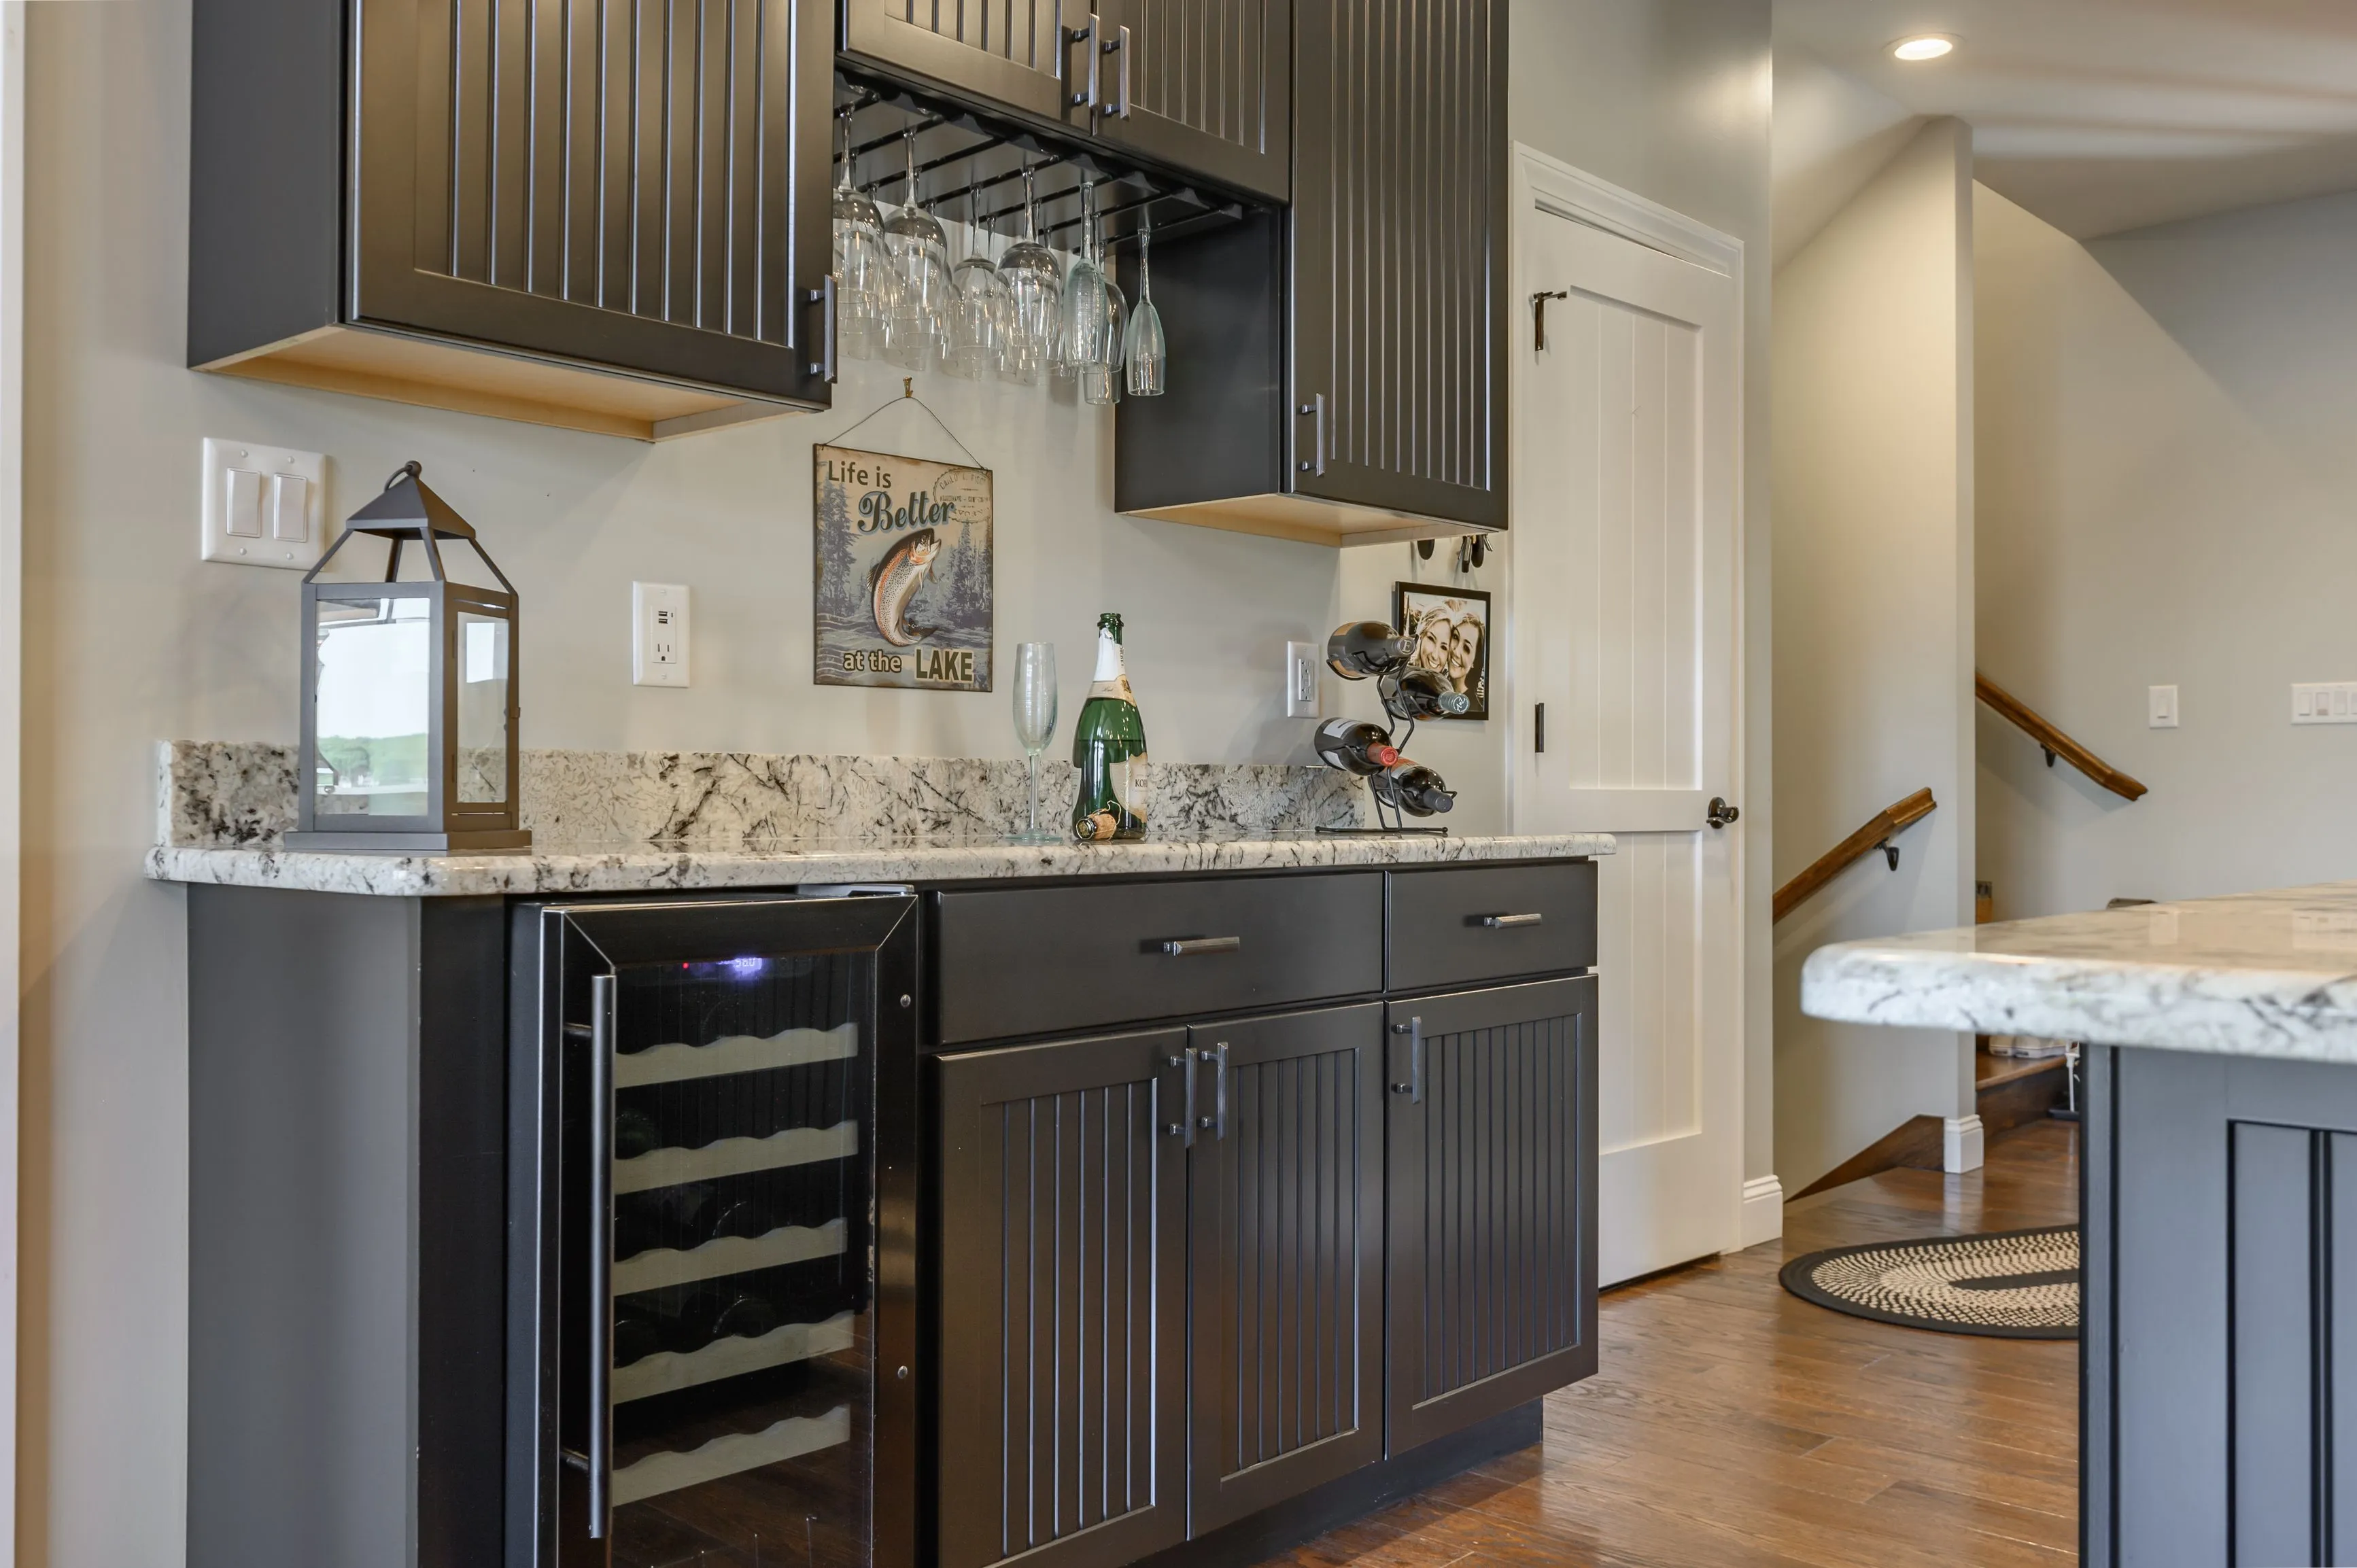 Modern kitchen interior with dark wood cabinets, granite countertops, and a built-in wine cooler.